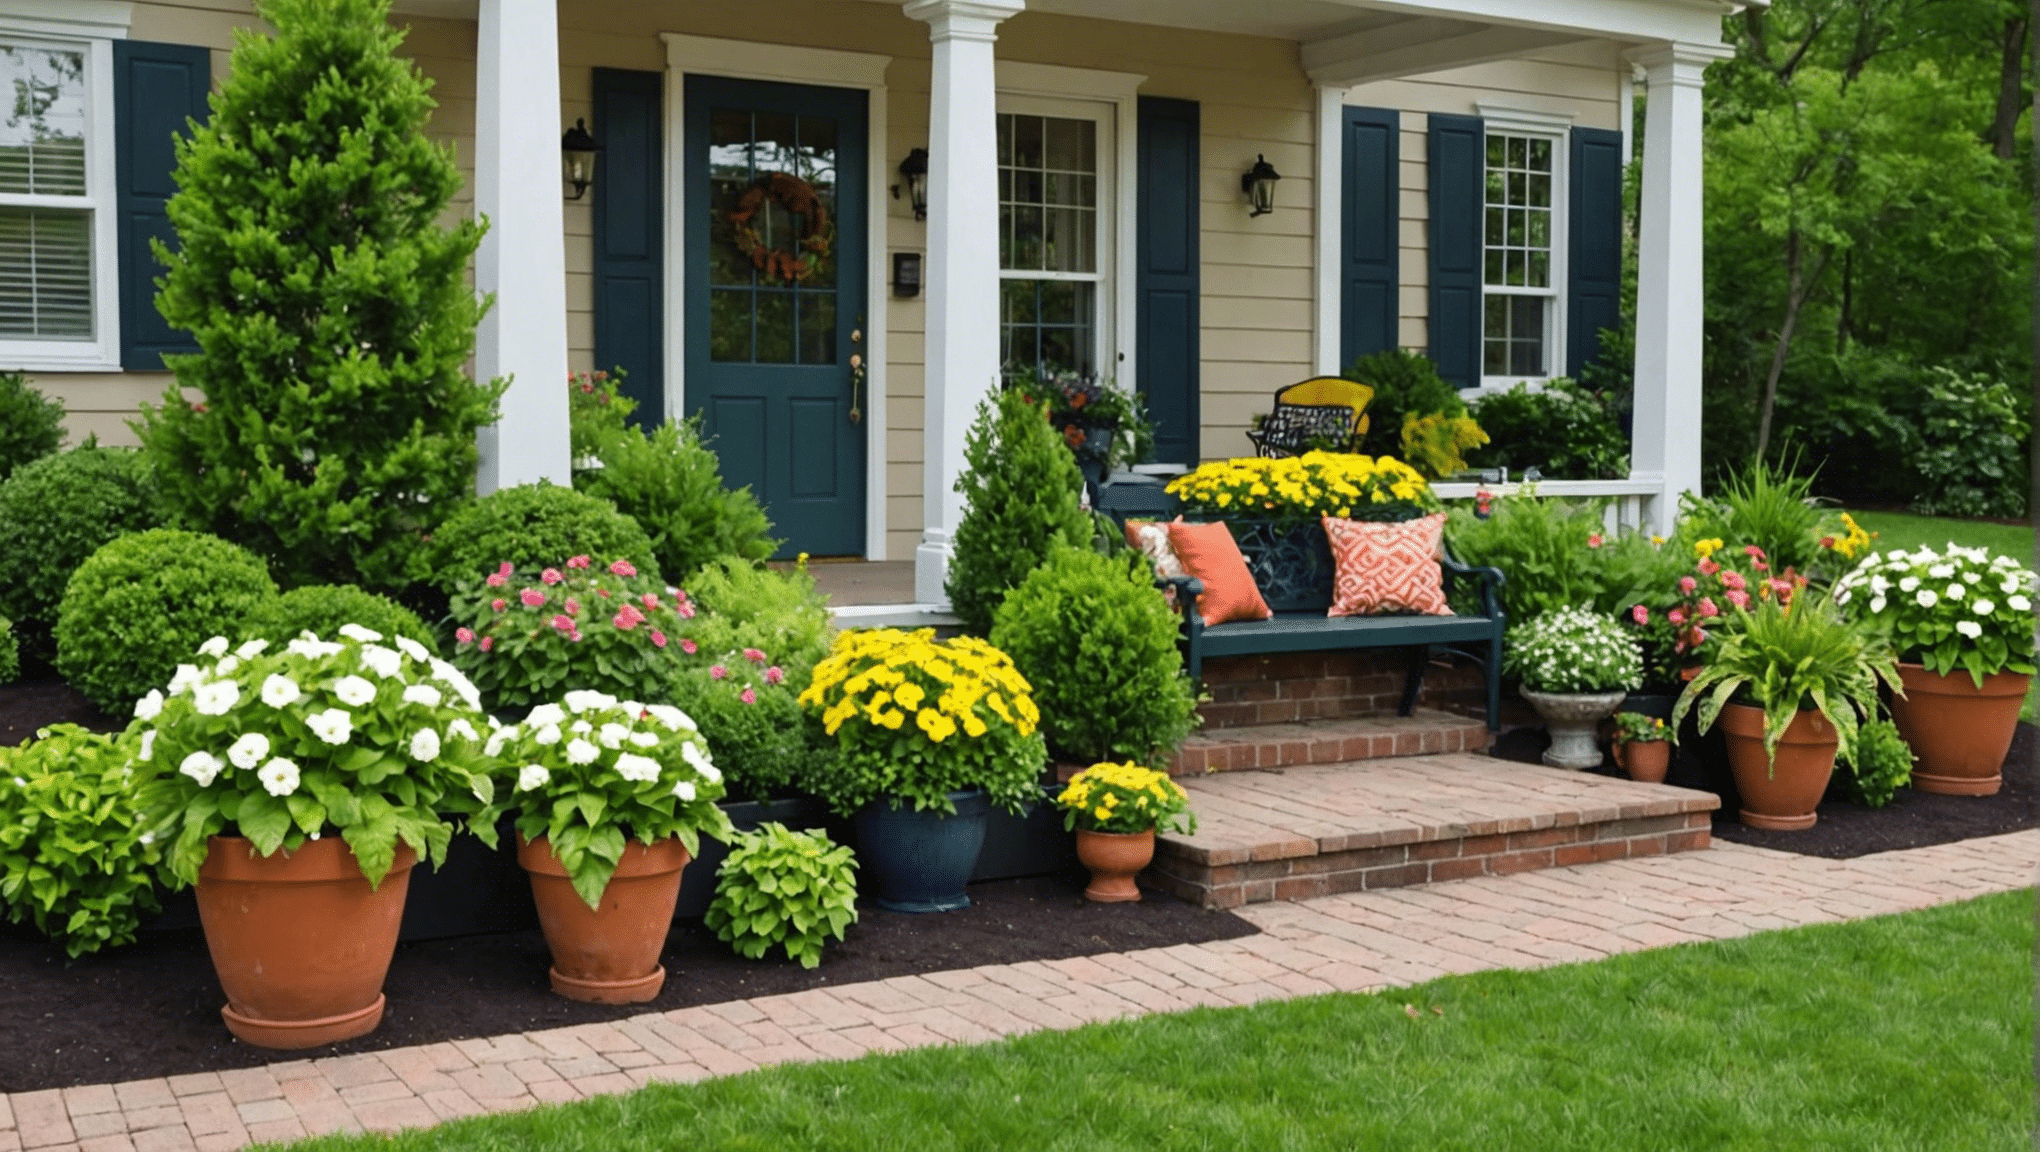 discover amazing hgtv container gardening ideas to bring vibrancy and life to your outdoor space. find inspiration for creative and practical container gardening projects that will elevate your home's aesthetic appeal.